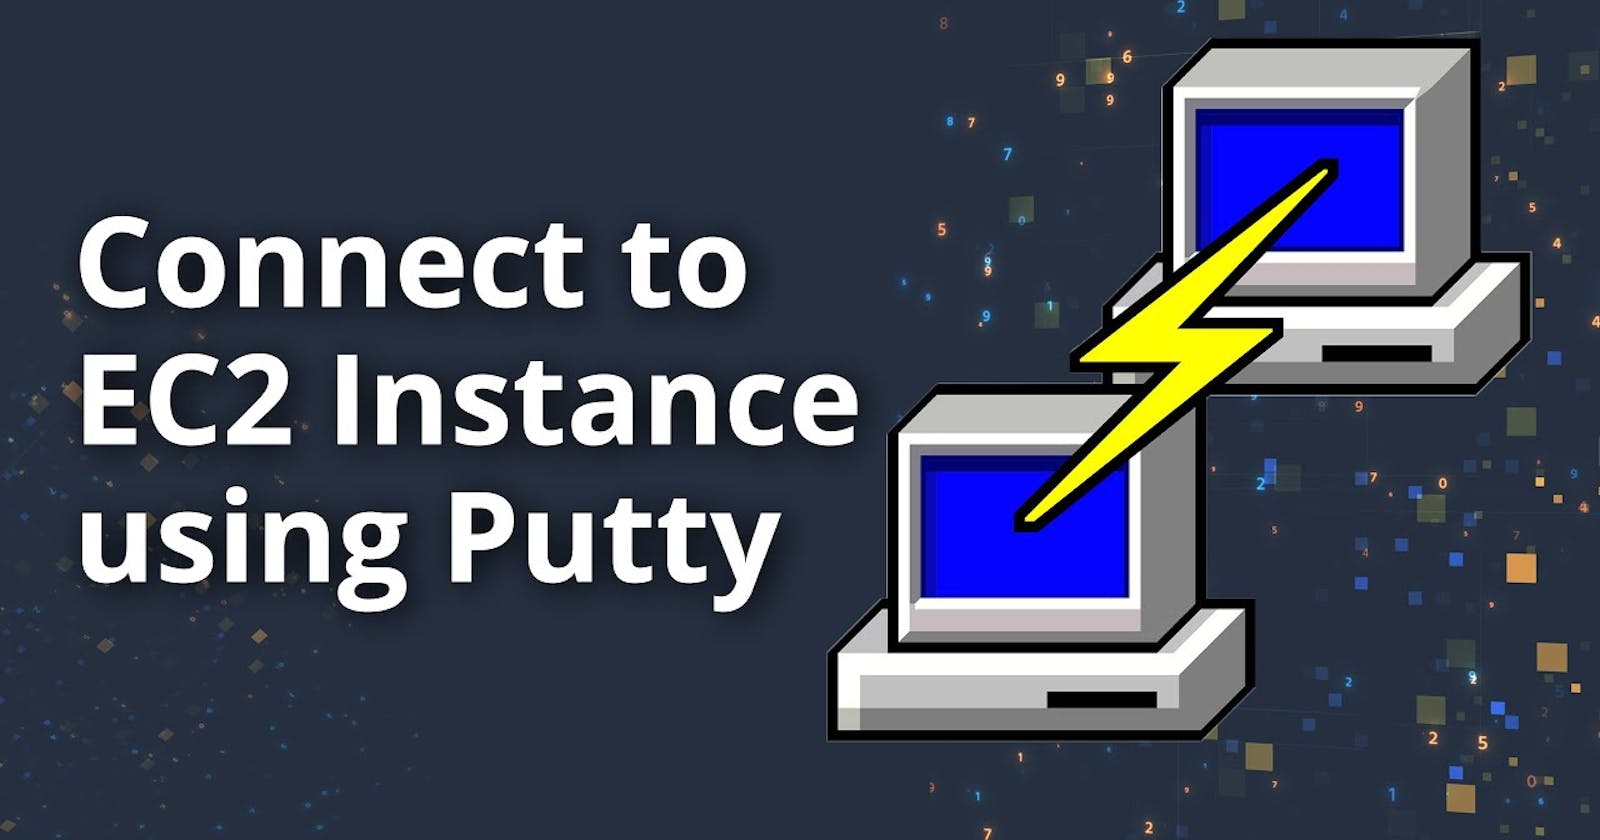 Connecting to Your Linux Instance from Windows Using PuTTY